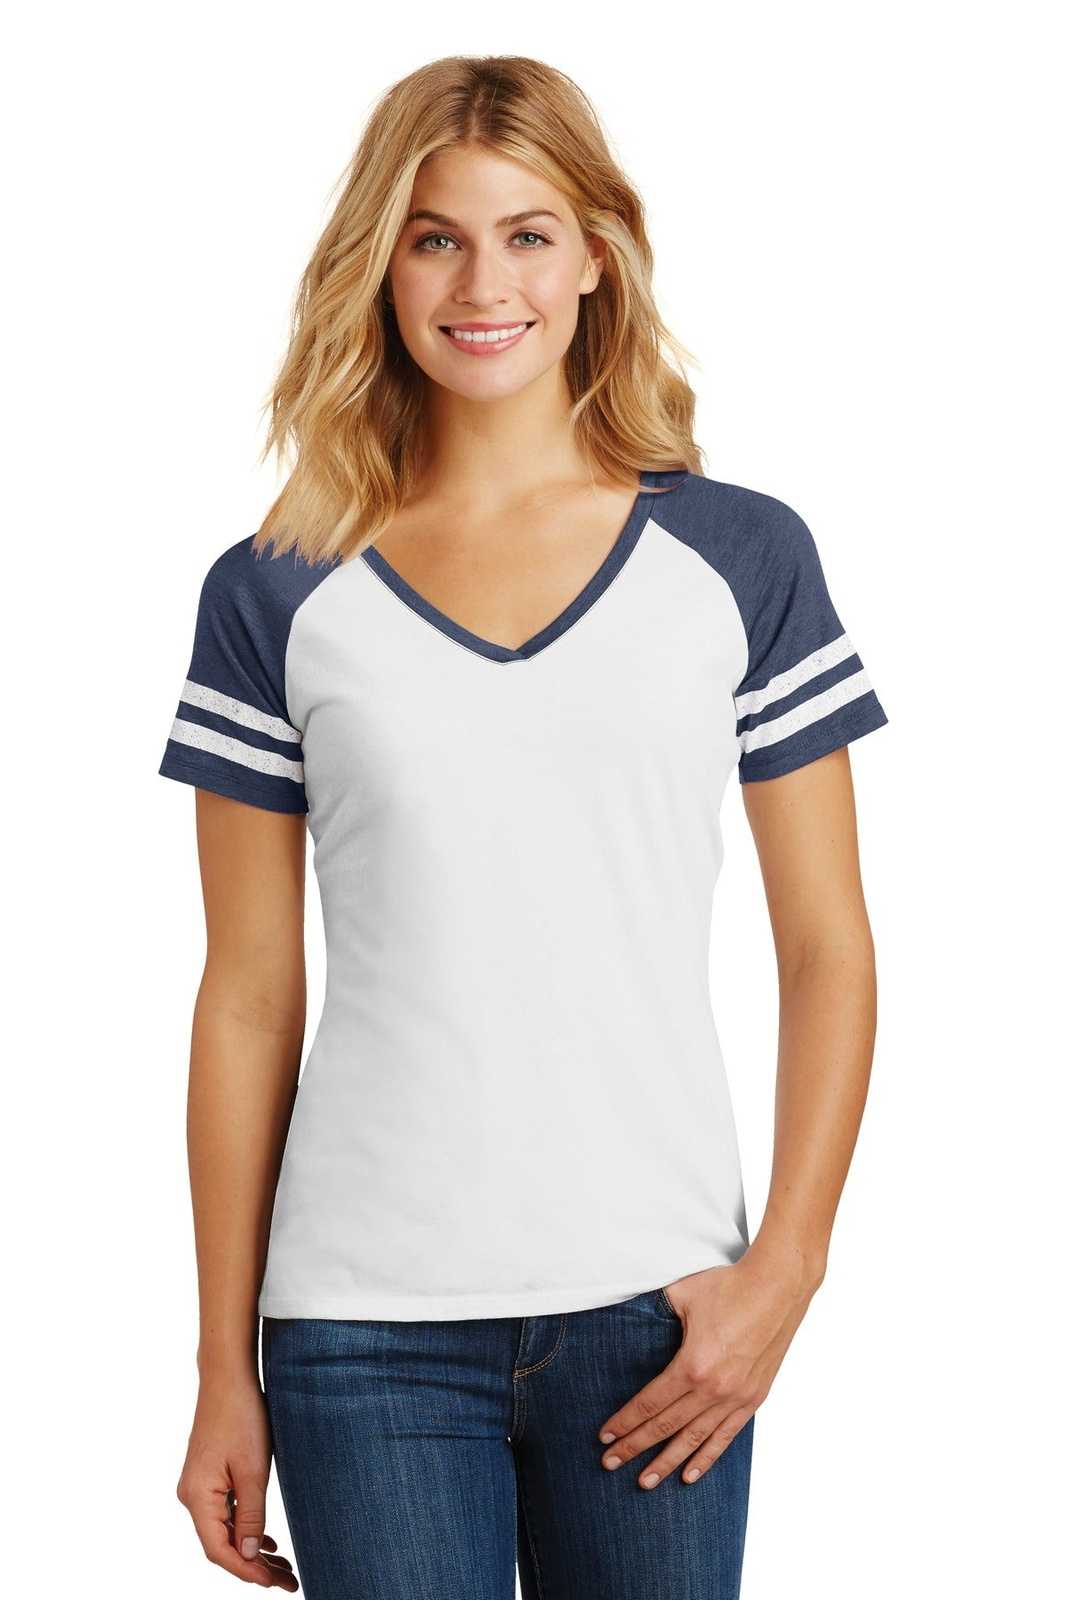 District DM476 Women's Game V-Neck Tee - White Heathered True Navy - HIT a Double - 1